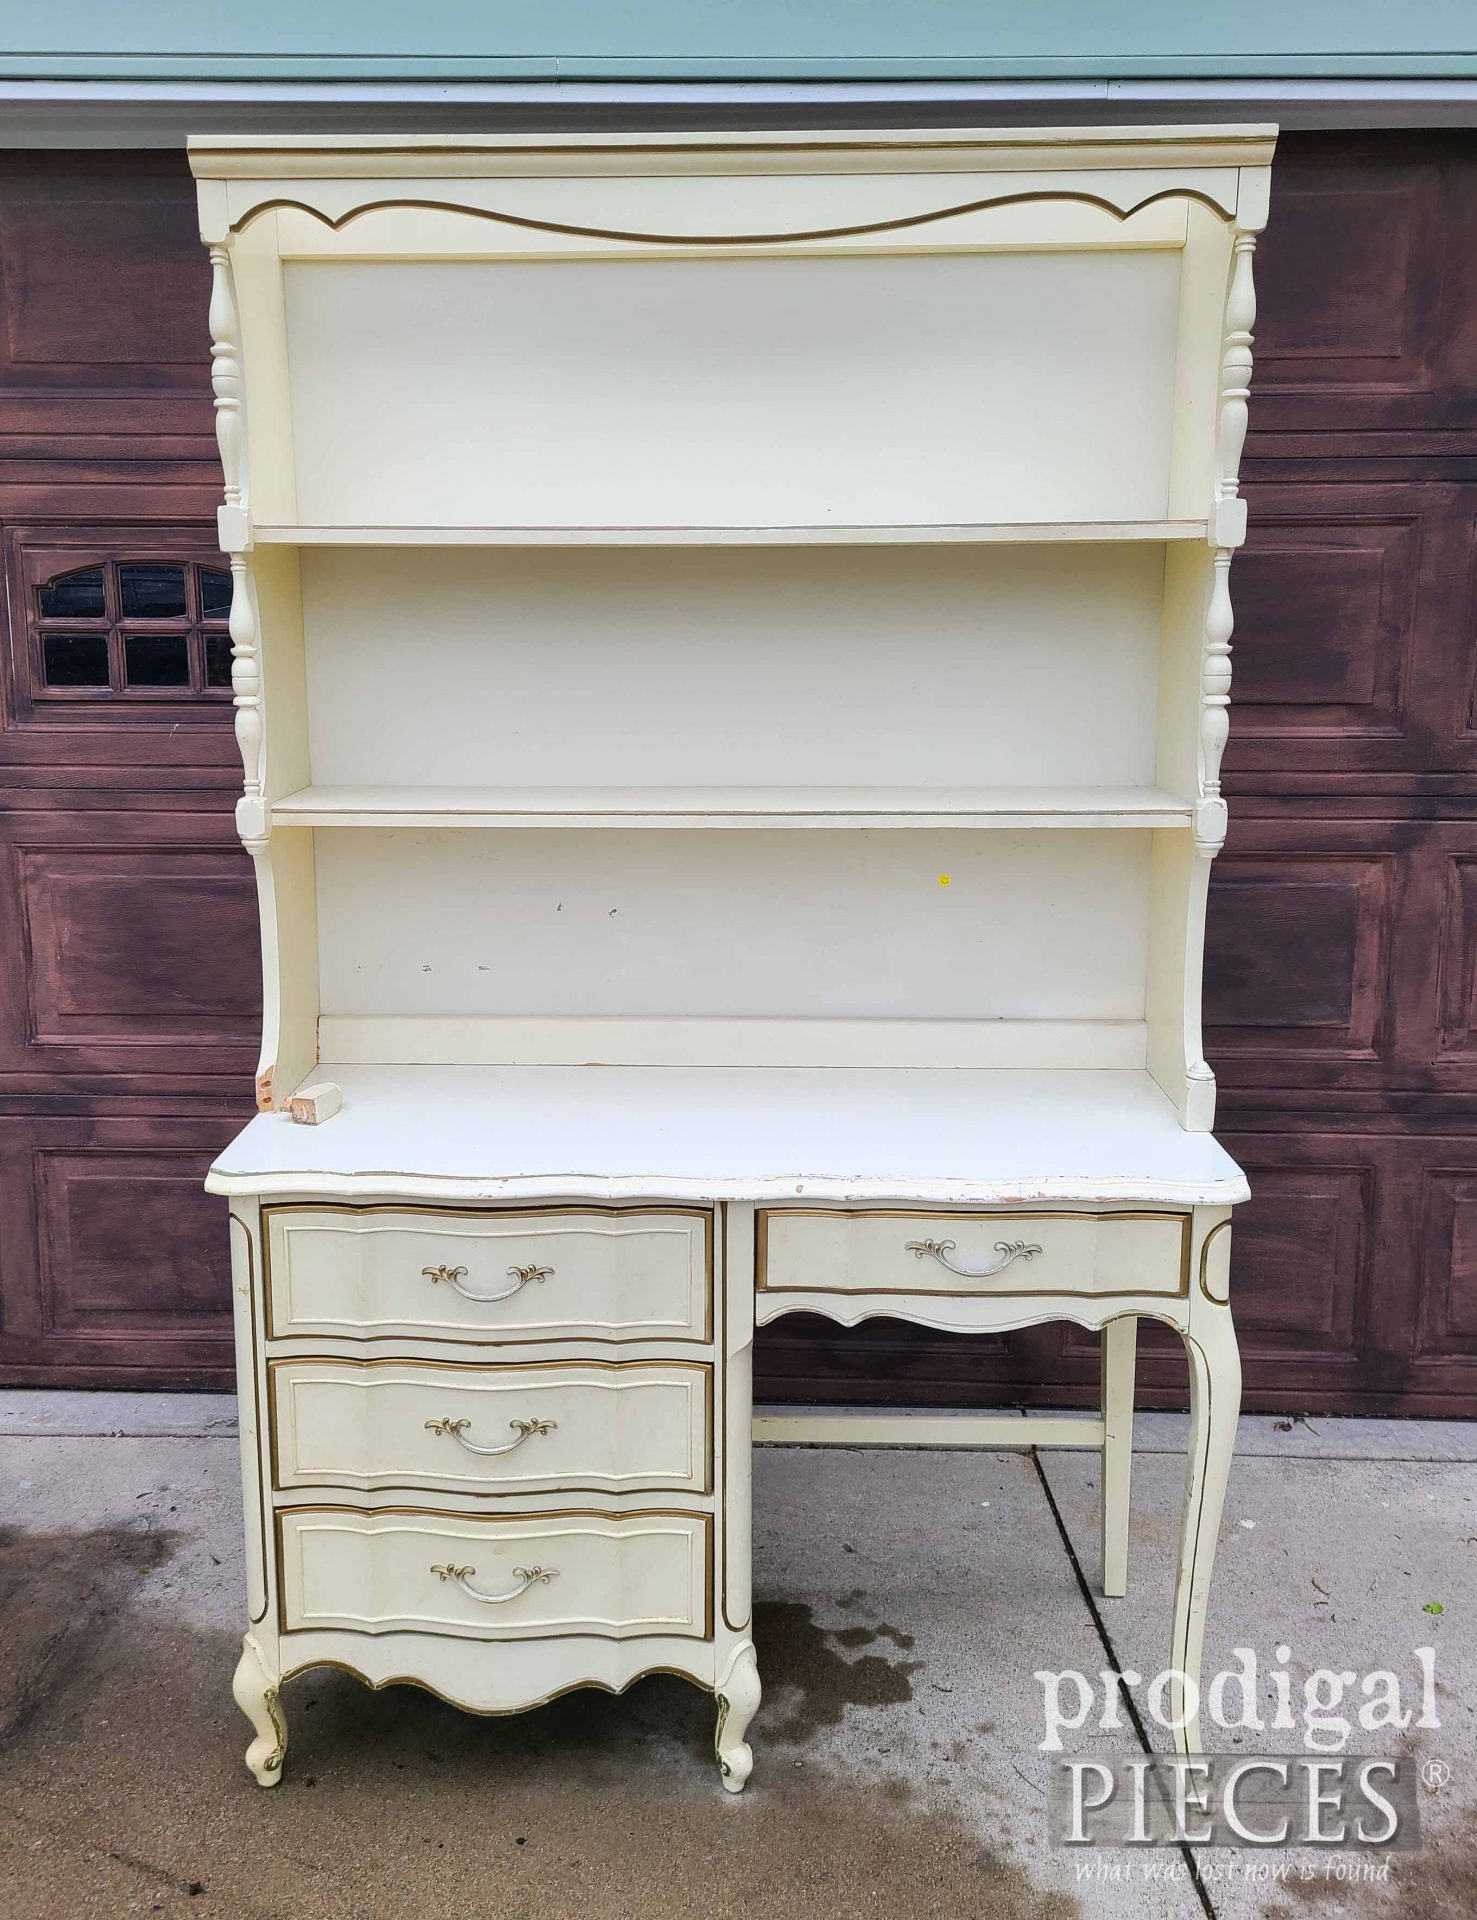 Vintage French Provincial Desk Before Makeover by Larissa of Prodigal Pieces | prodigalpieces.com